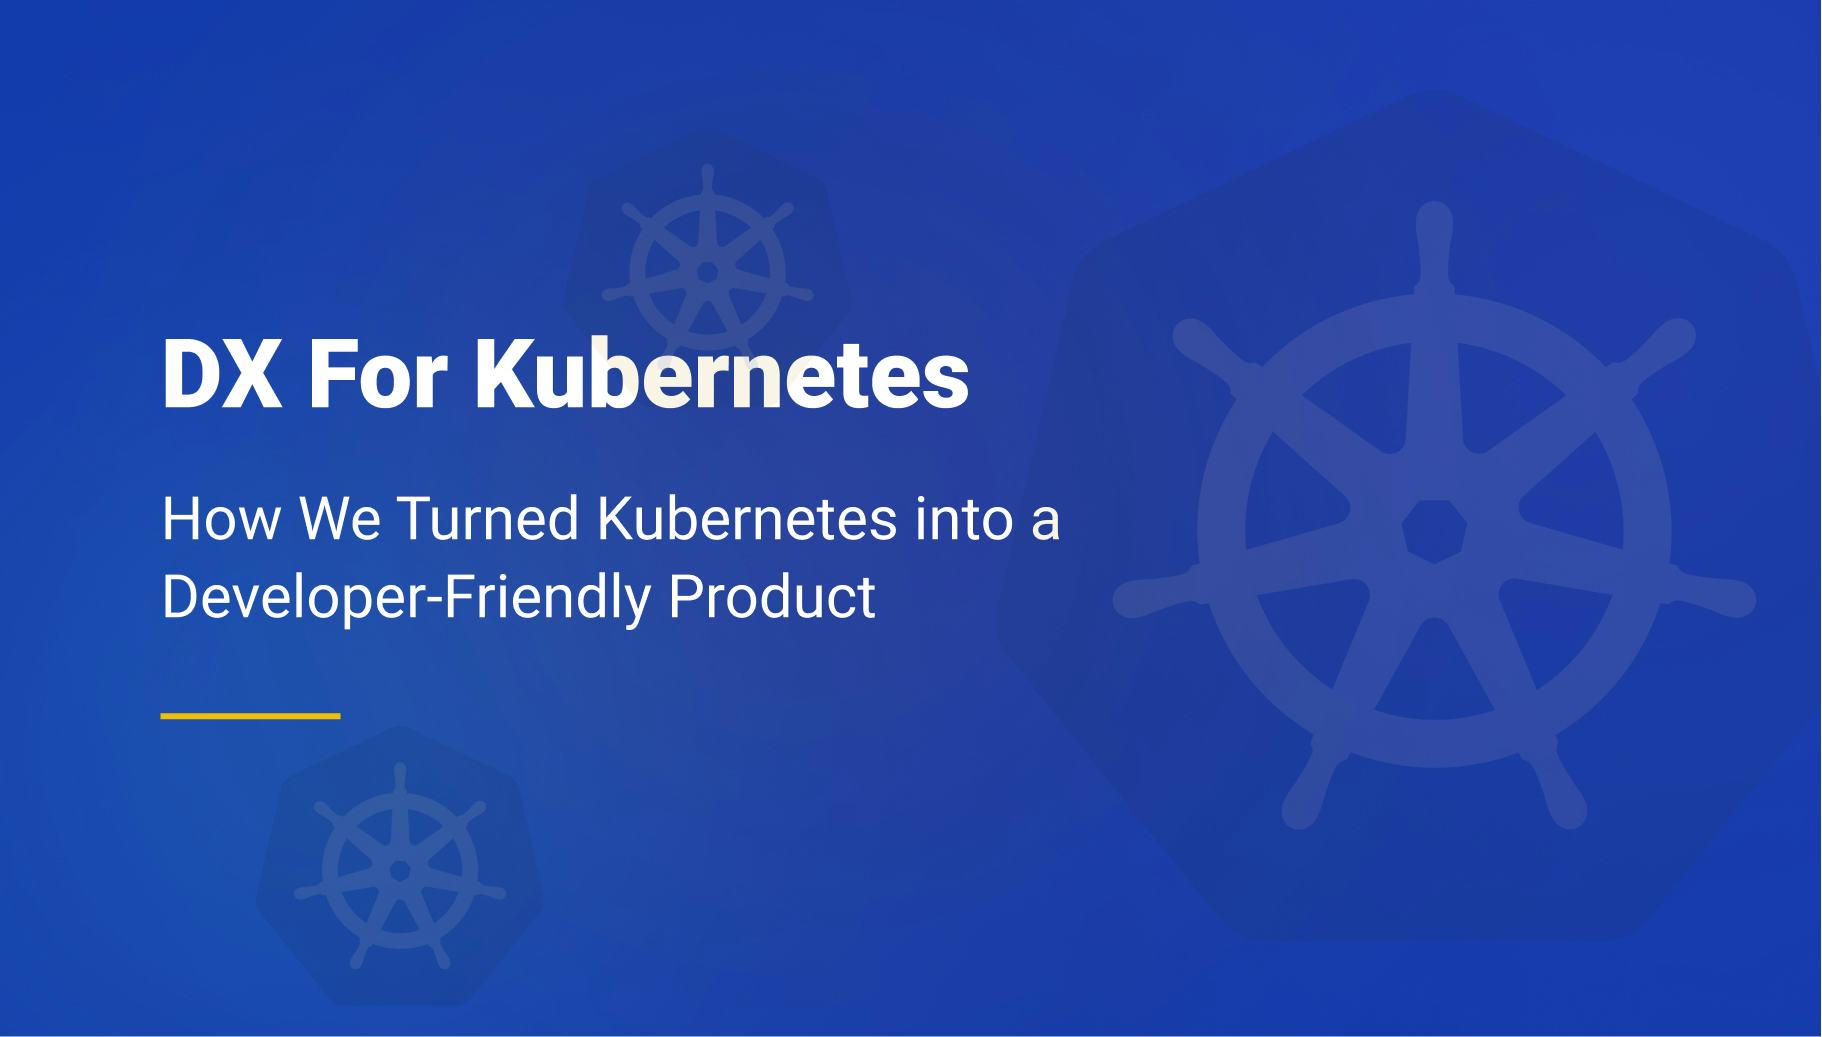 Turning Kubernetes into a Developer-Friendly Product - Qovery